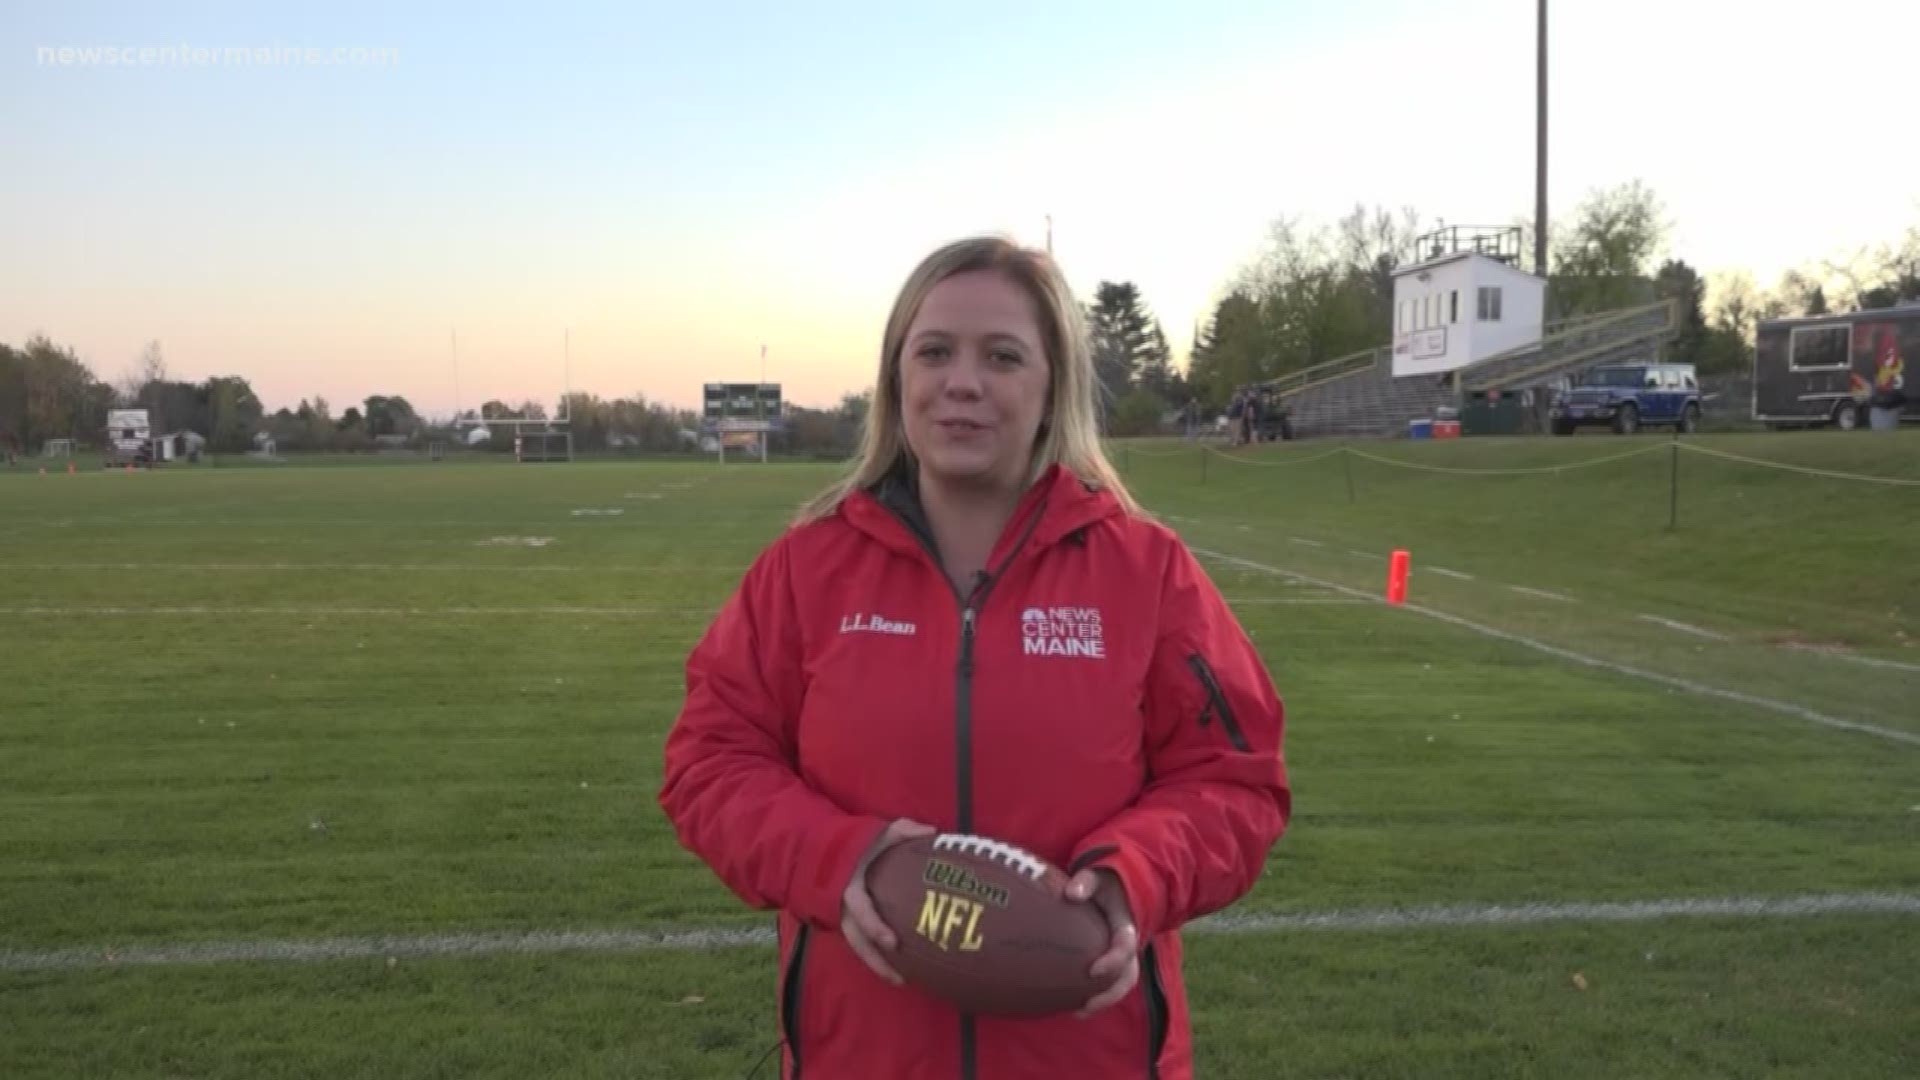 Previewing Week 8 of The Fifth Quarter from Pittsfield